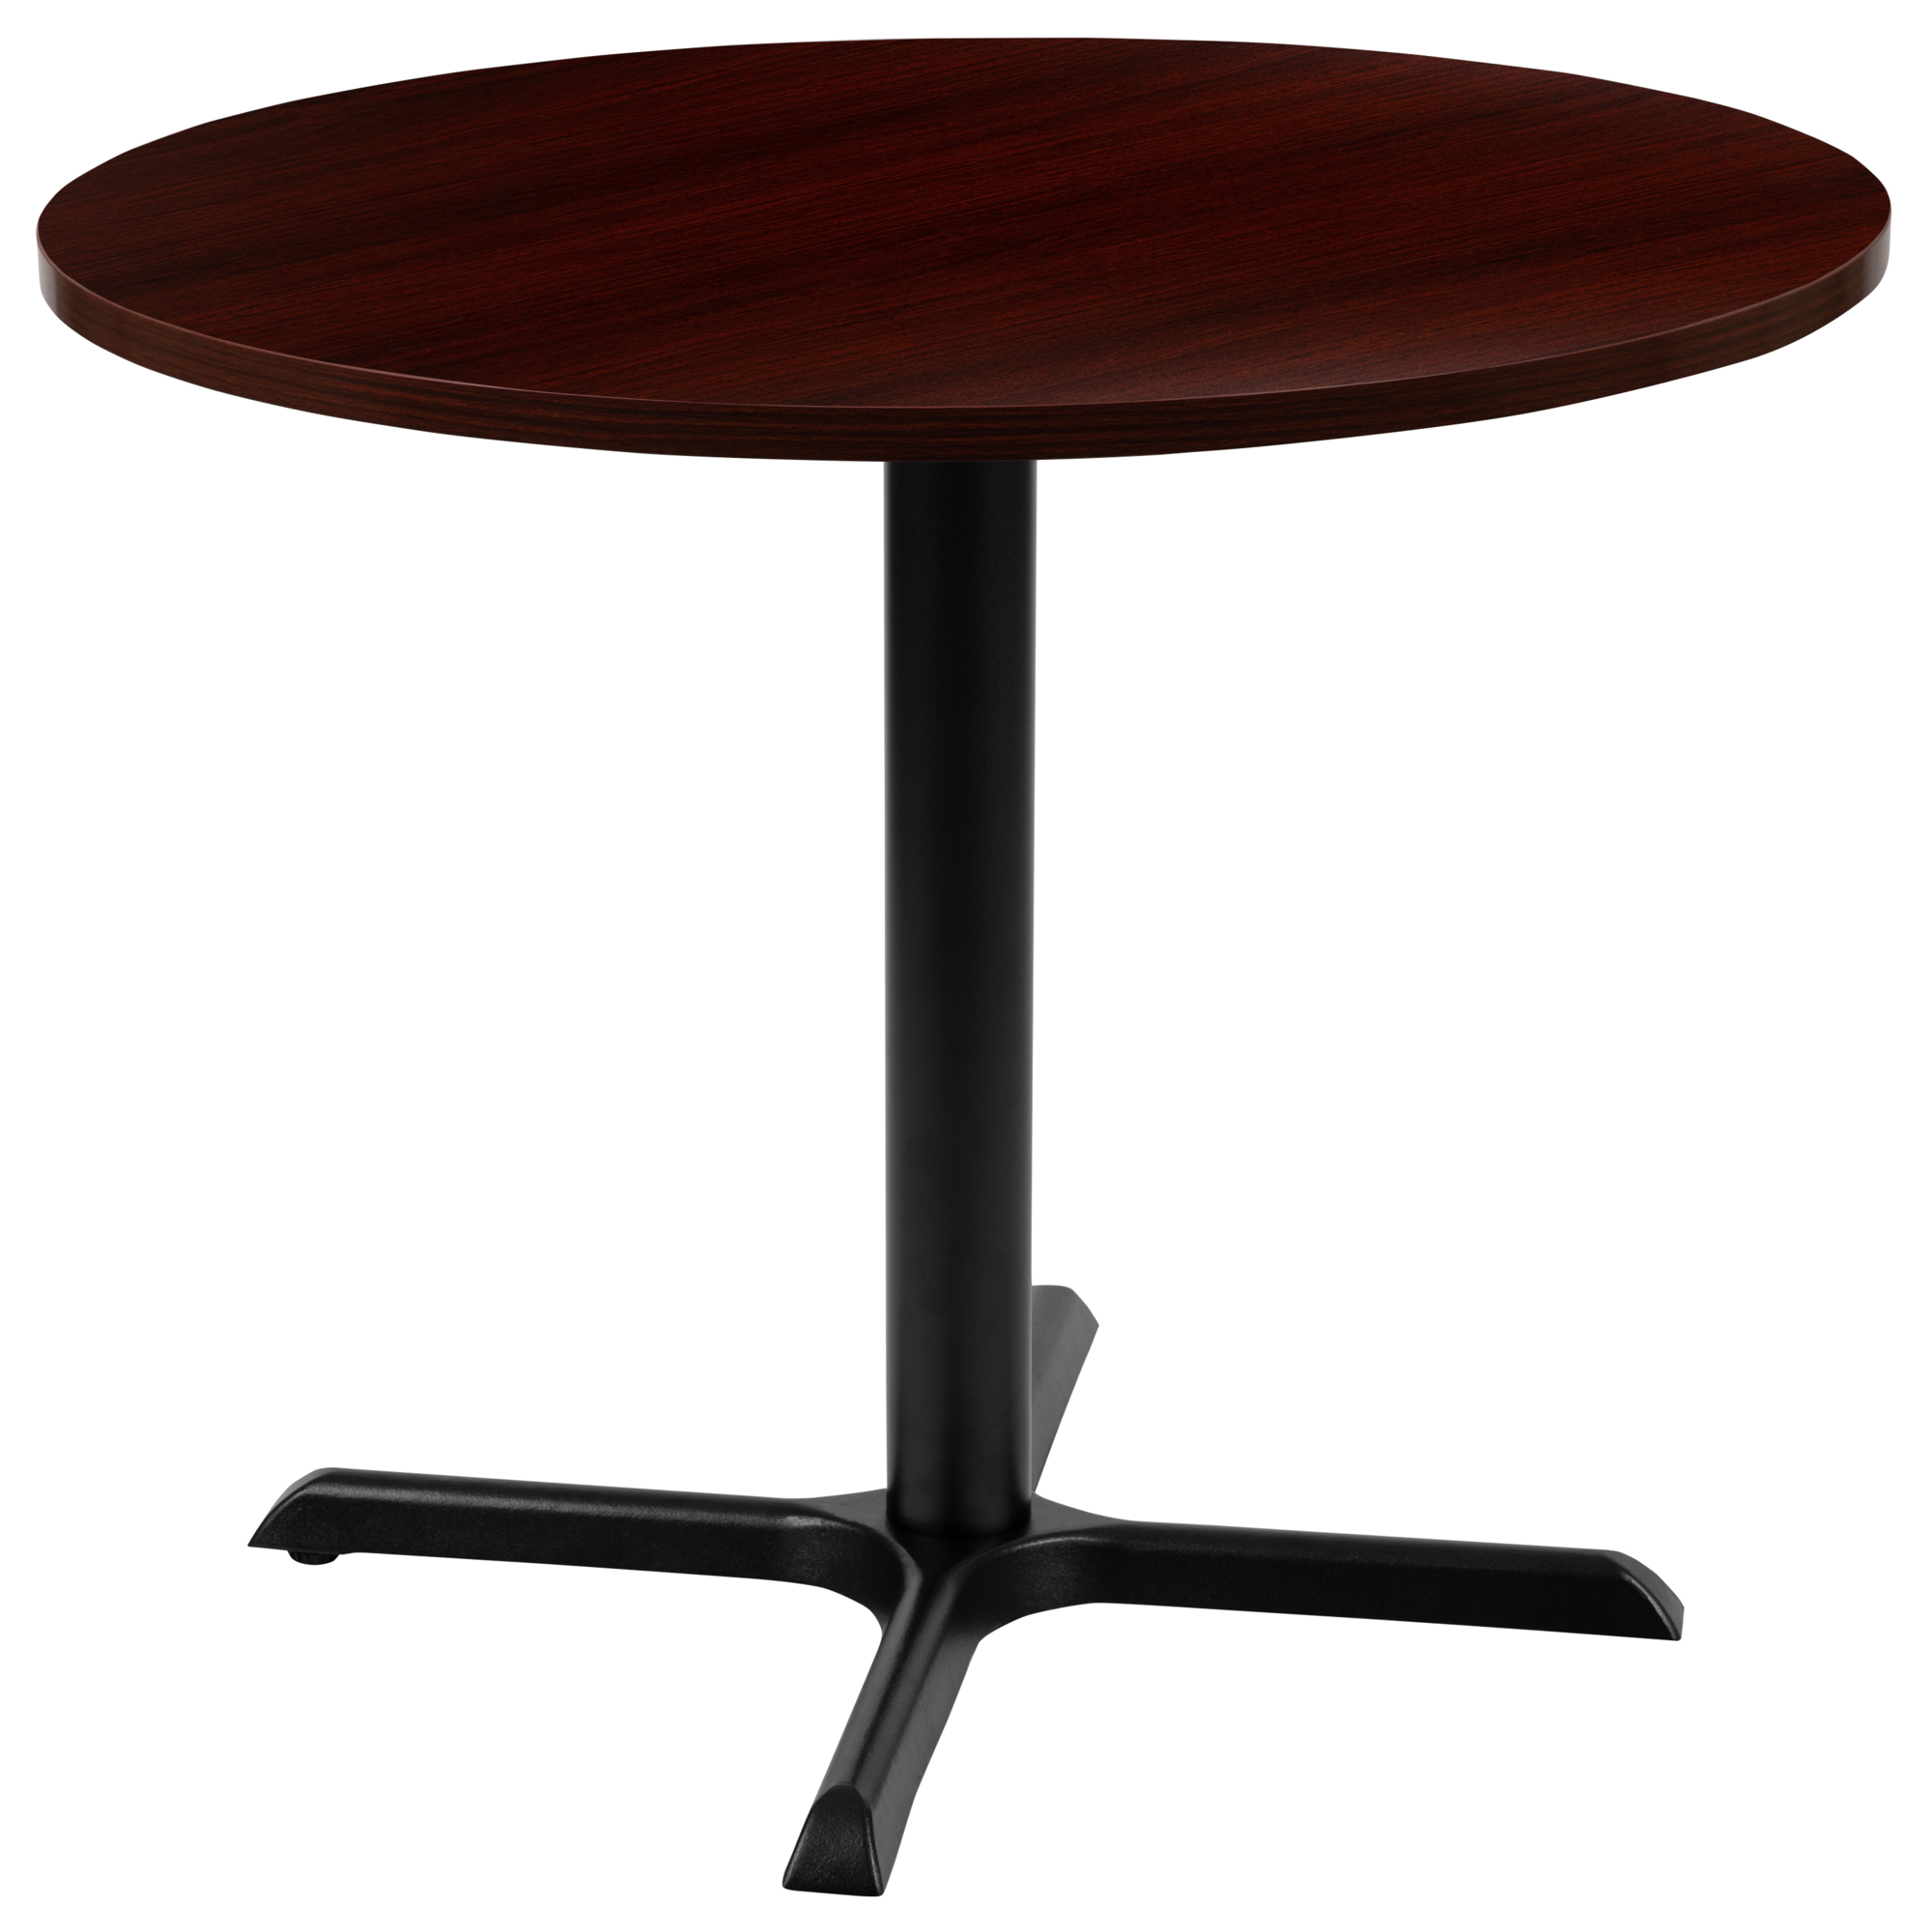 Flash Furniture, 36Inch Round Conference Table in Mahogany, Height 30 in, Width 35.5 in, Length 35.5 in, Model GCMBLK15MHG